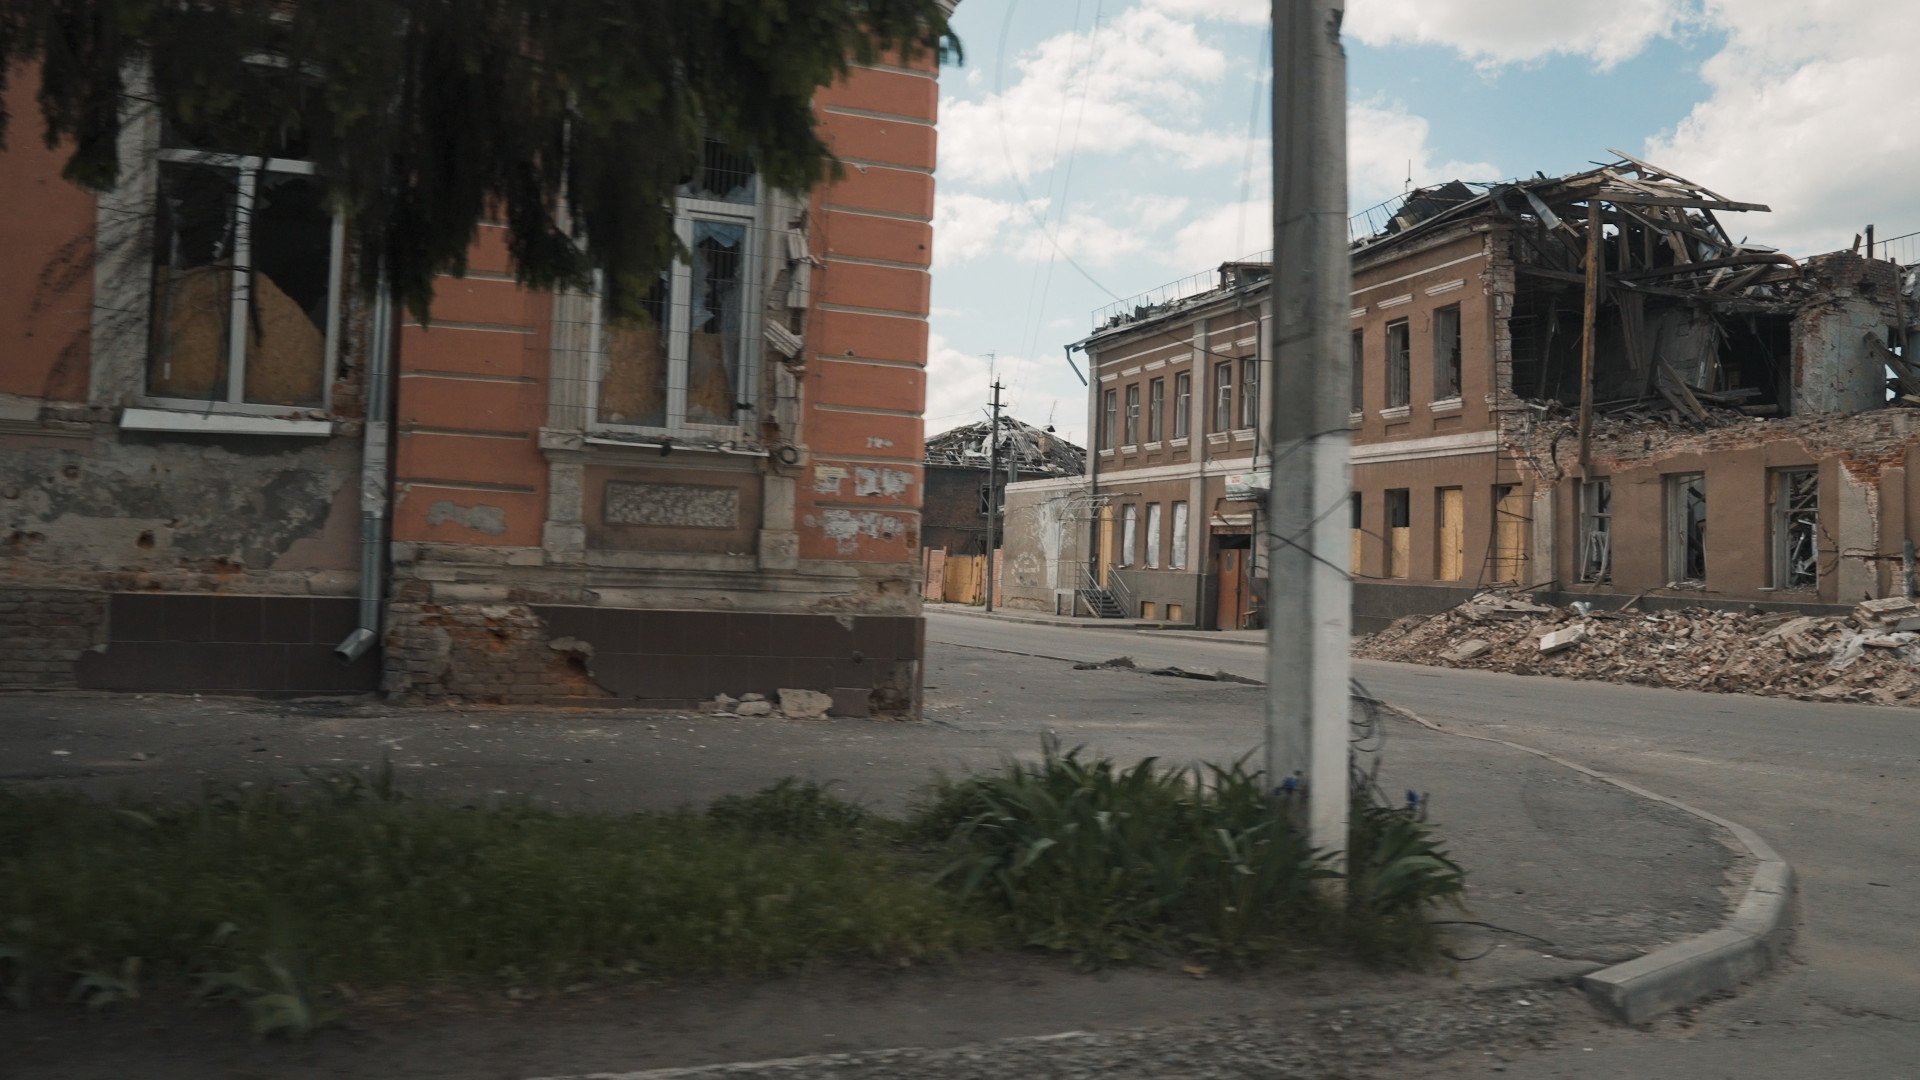 Vovchansk Has Already Been Under Occupation. Now, Russia Wants to Capture It Again